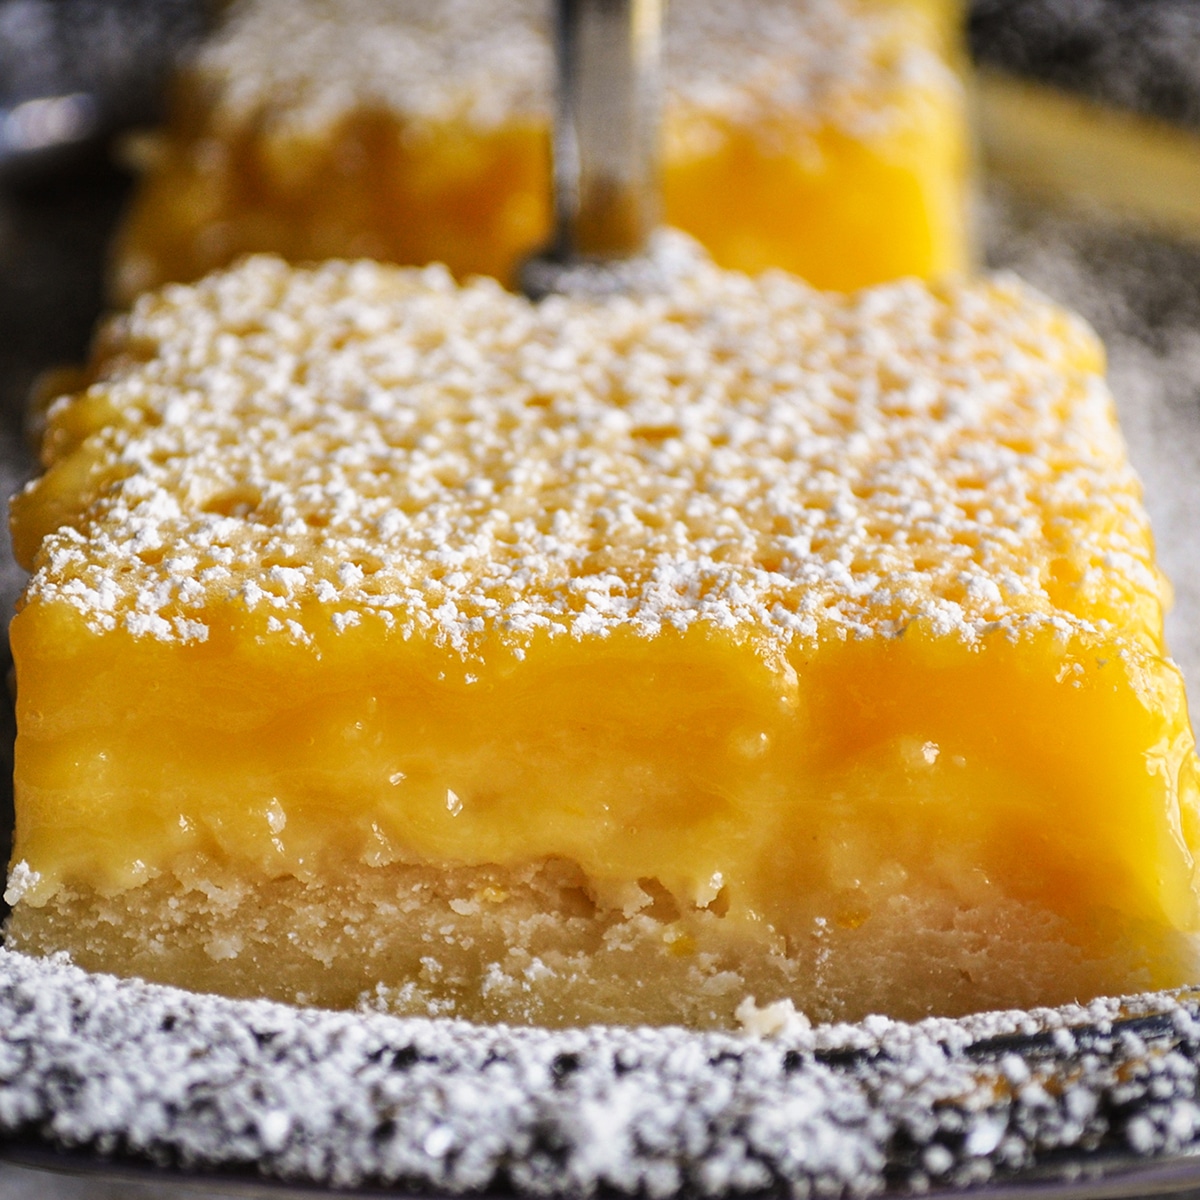 A lemon bar that's been sprinkled with powdered sugar resting on a silver platter.